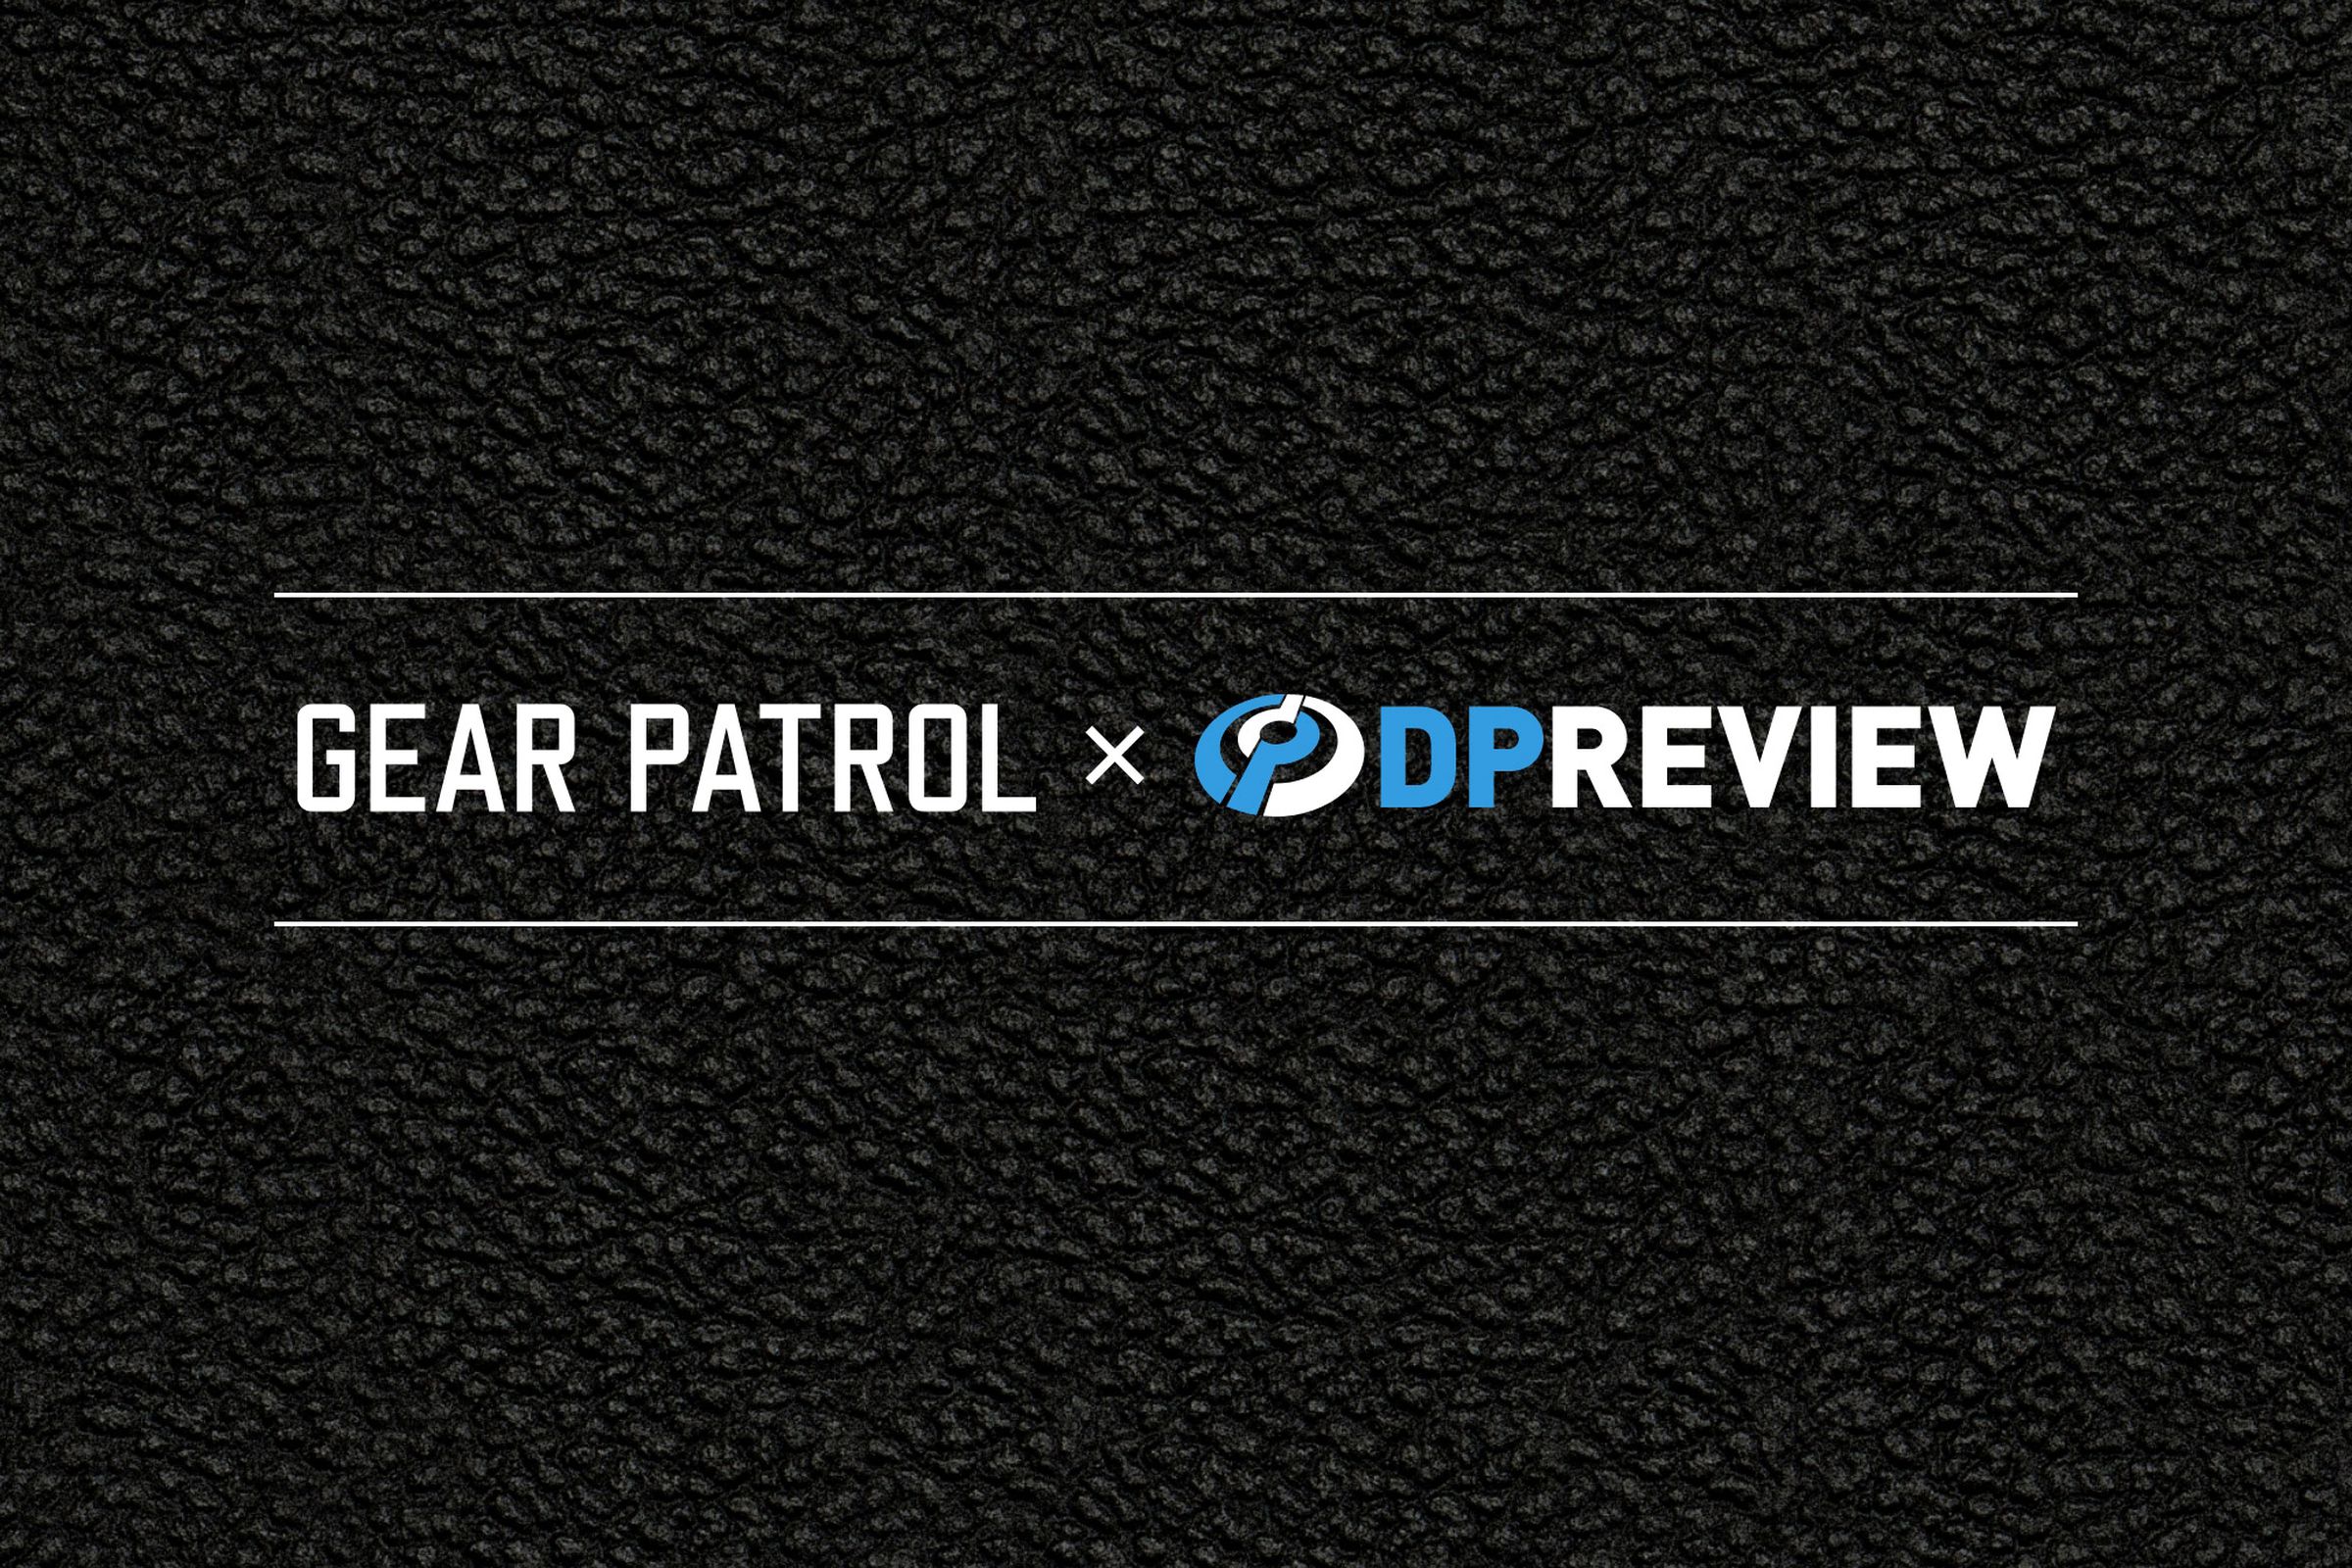 The Gear Patrol and DPReview logos against a textured black background.